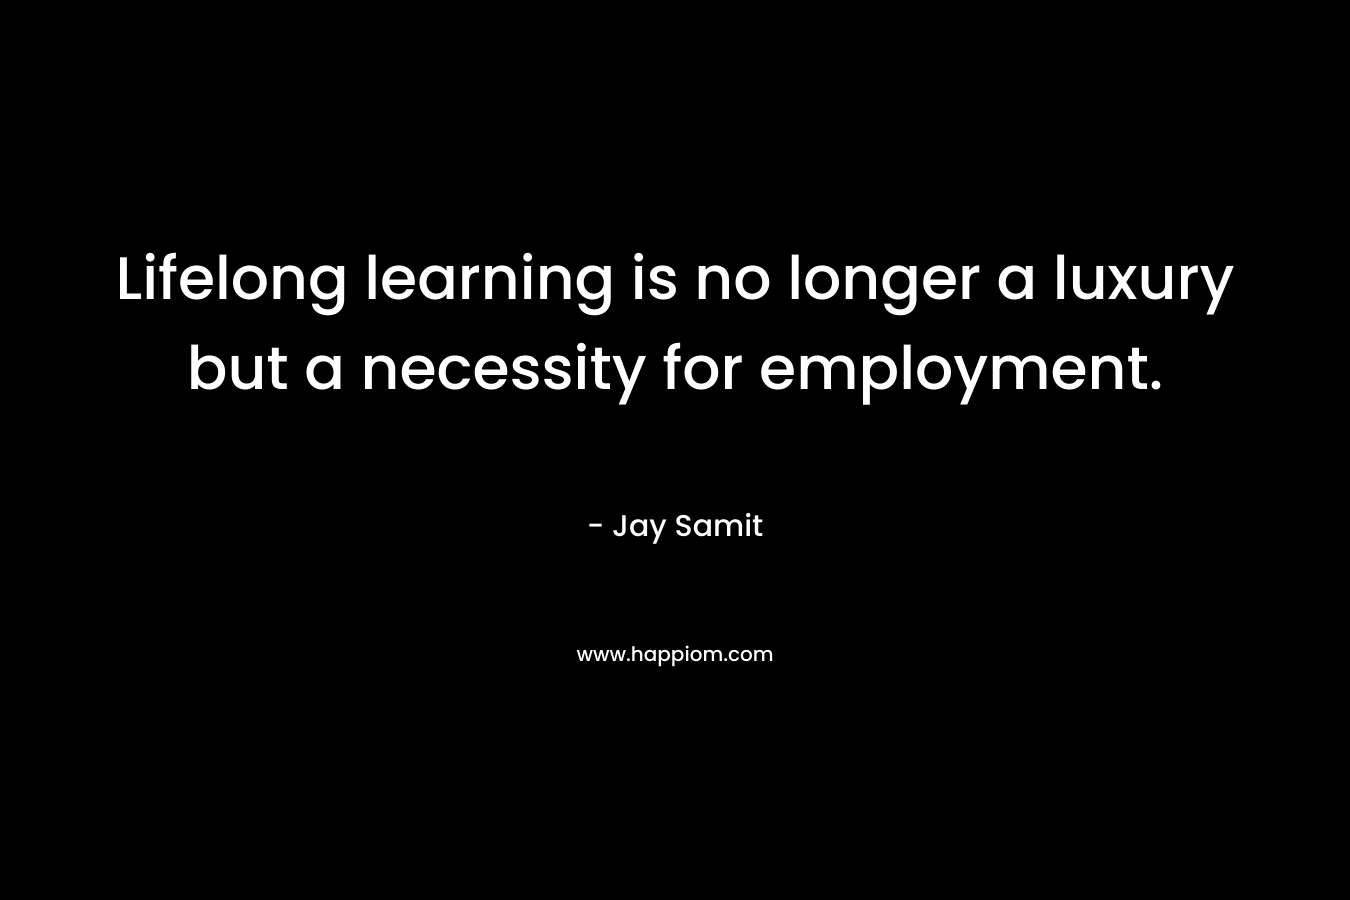 Lifelong learning is no longer a luxury but a necessity for employment.